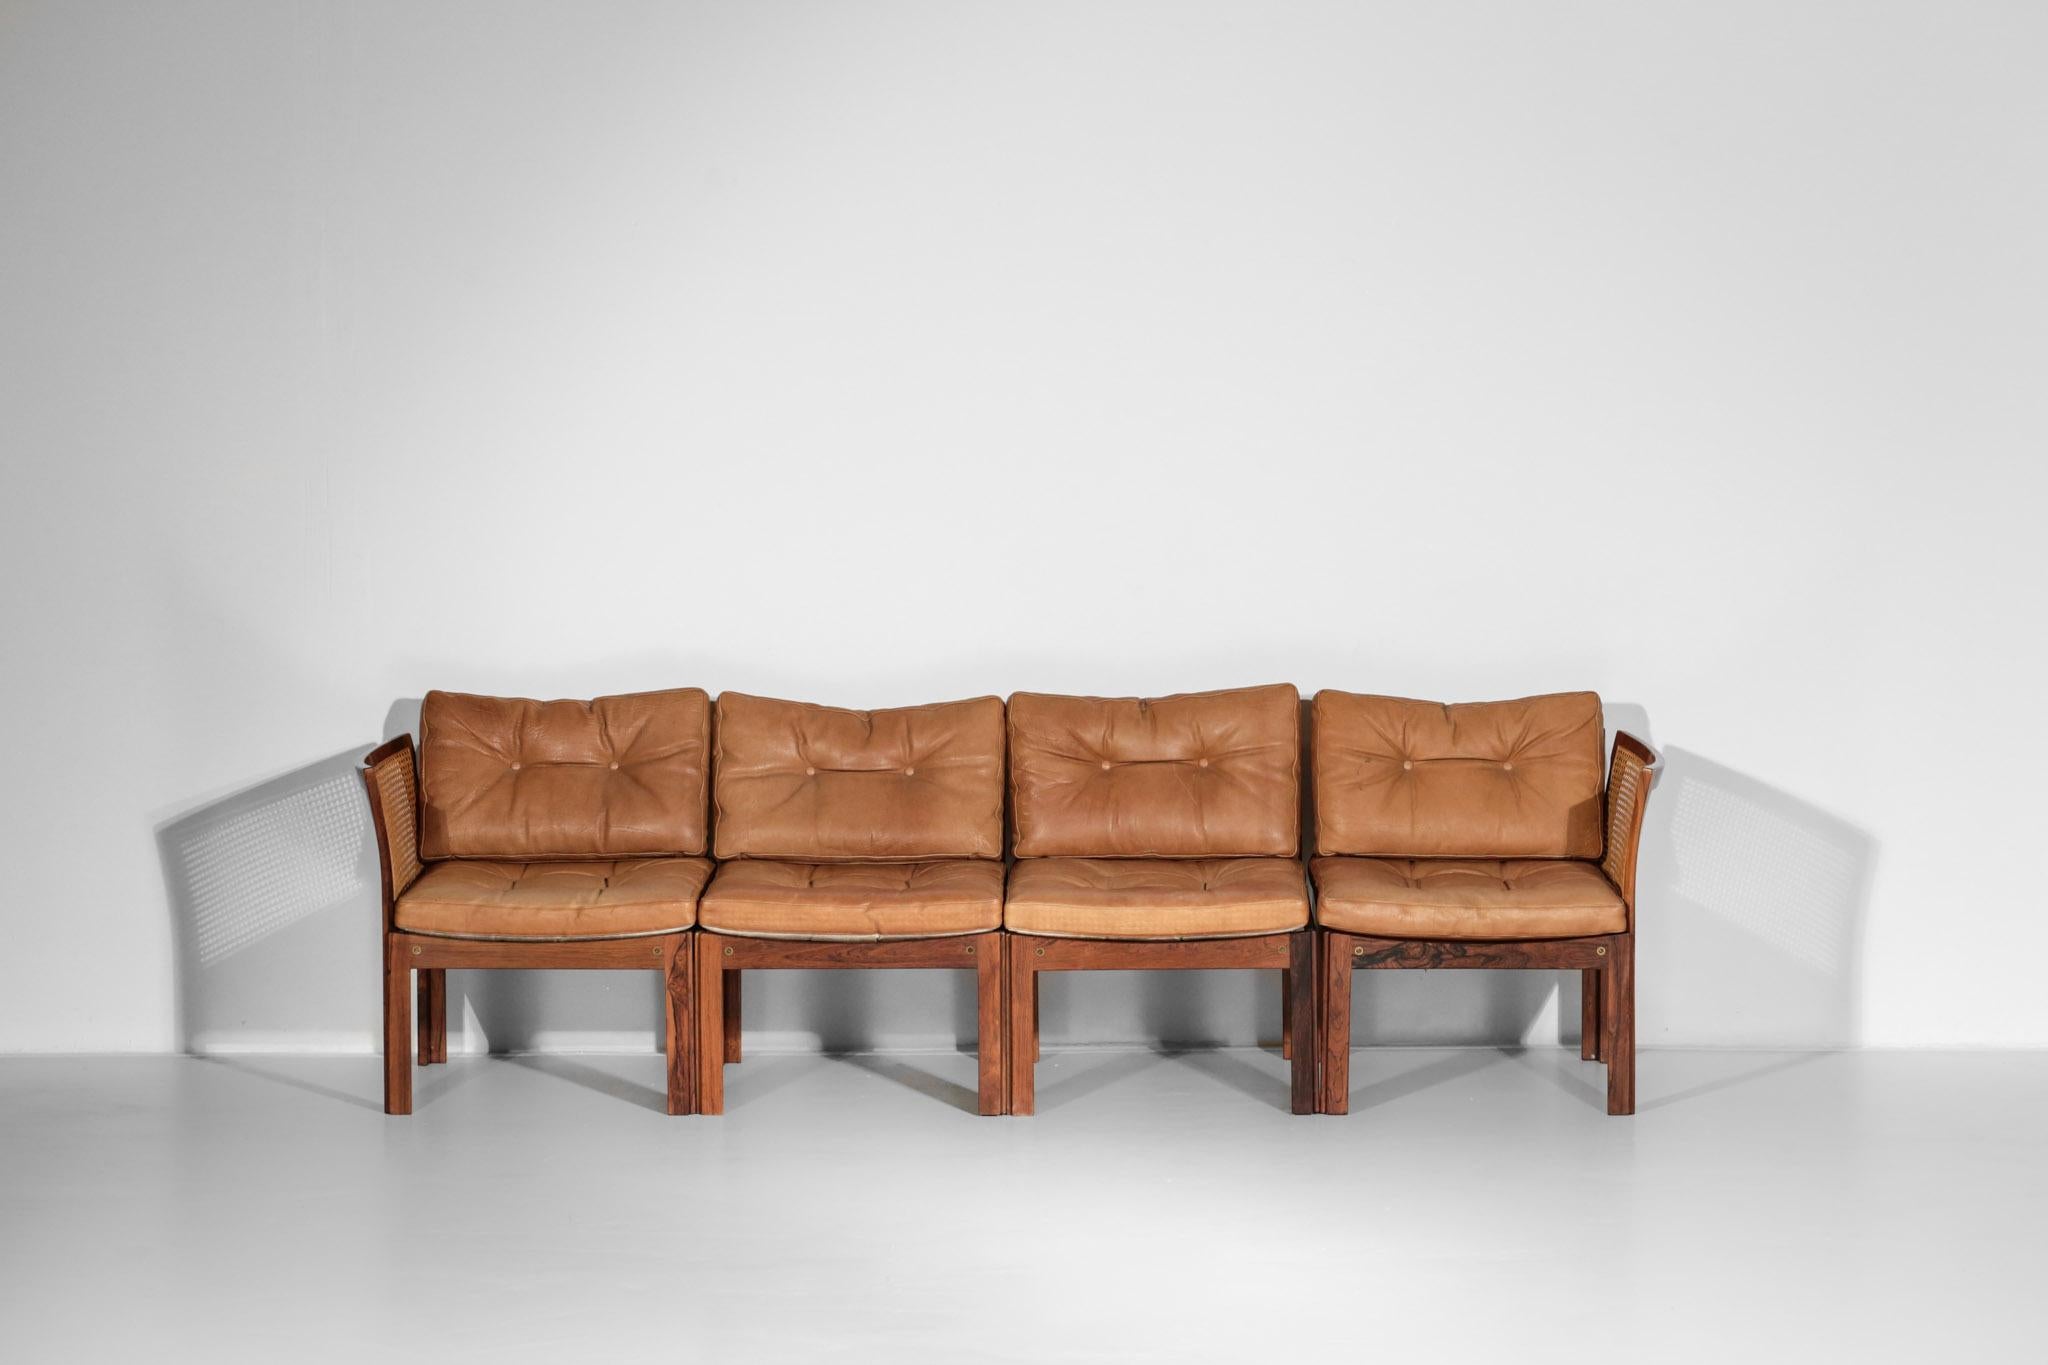 Illum Wikkelso Leather Sofa in Rosewood and Woven Rattan Cane For Sale 6